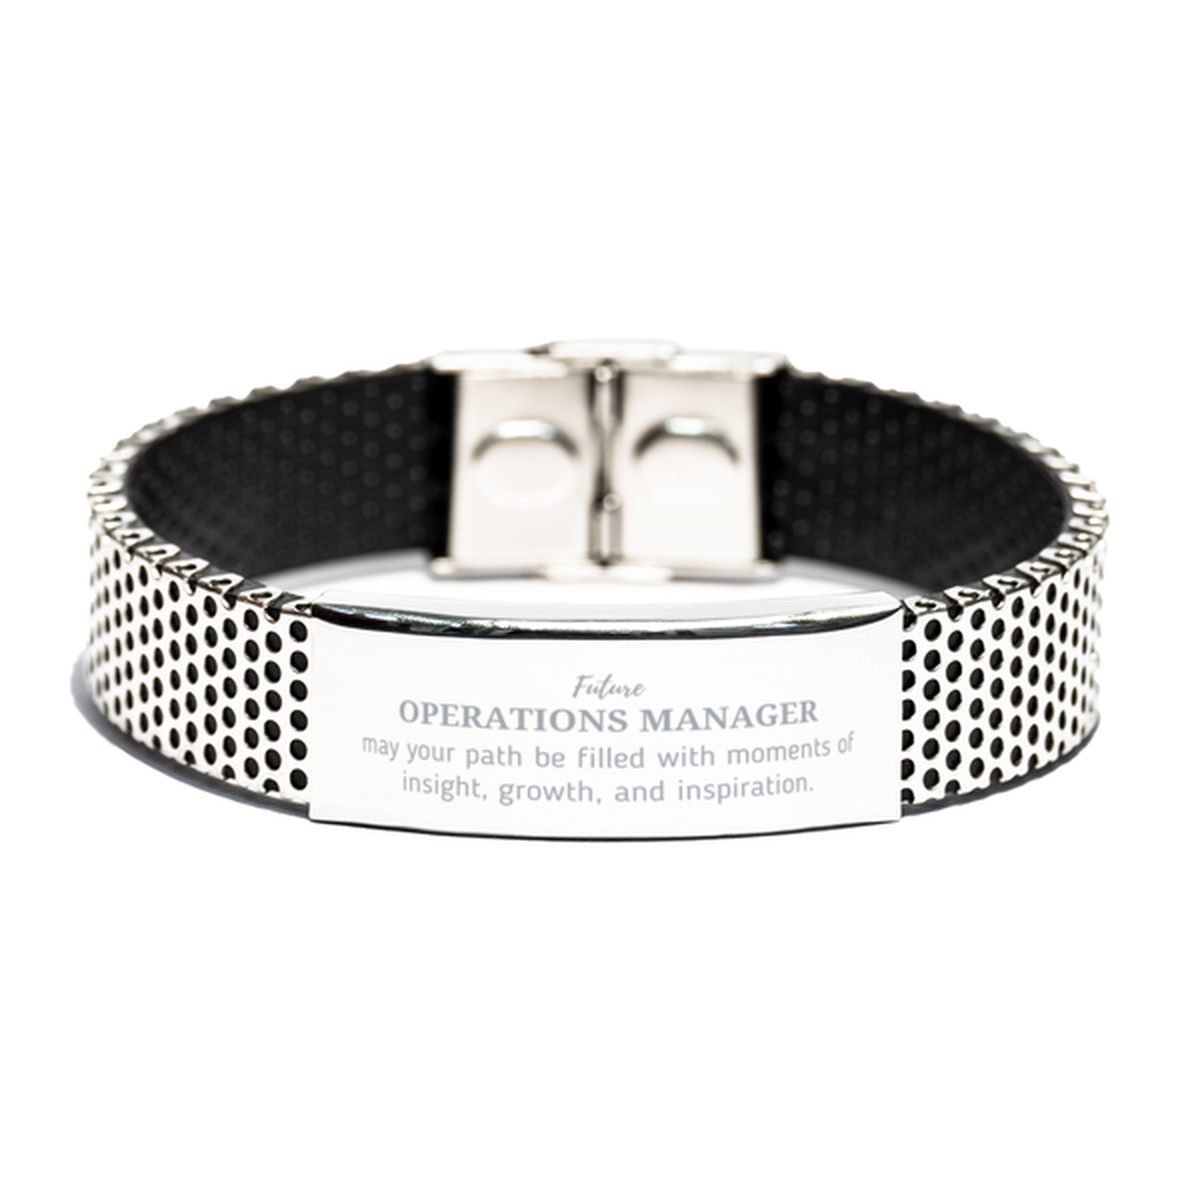 Future Operations Manager Gifts, May your path be filled with moments of insight, Graduation Gifts for New Operations Manager, Christmas Unique Stainless Steel Bracelet For Men, Women, Friends